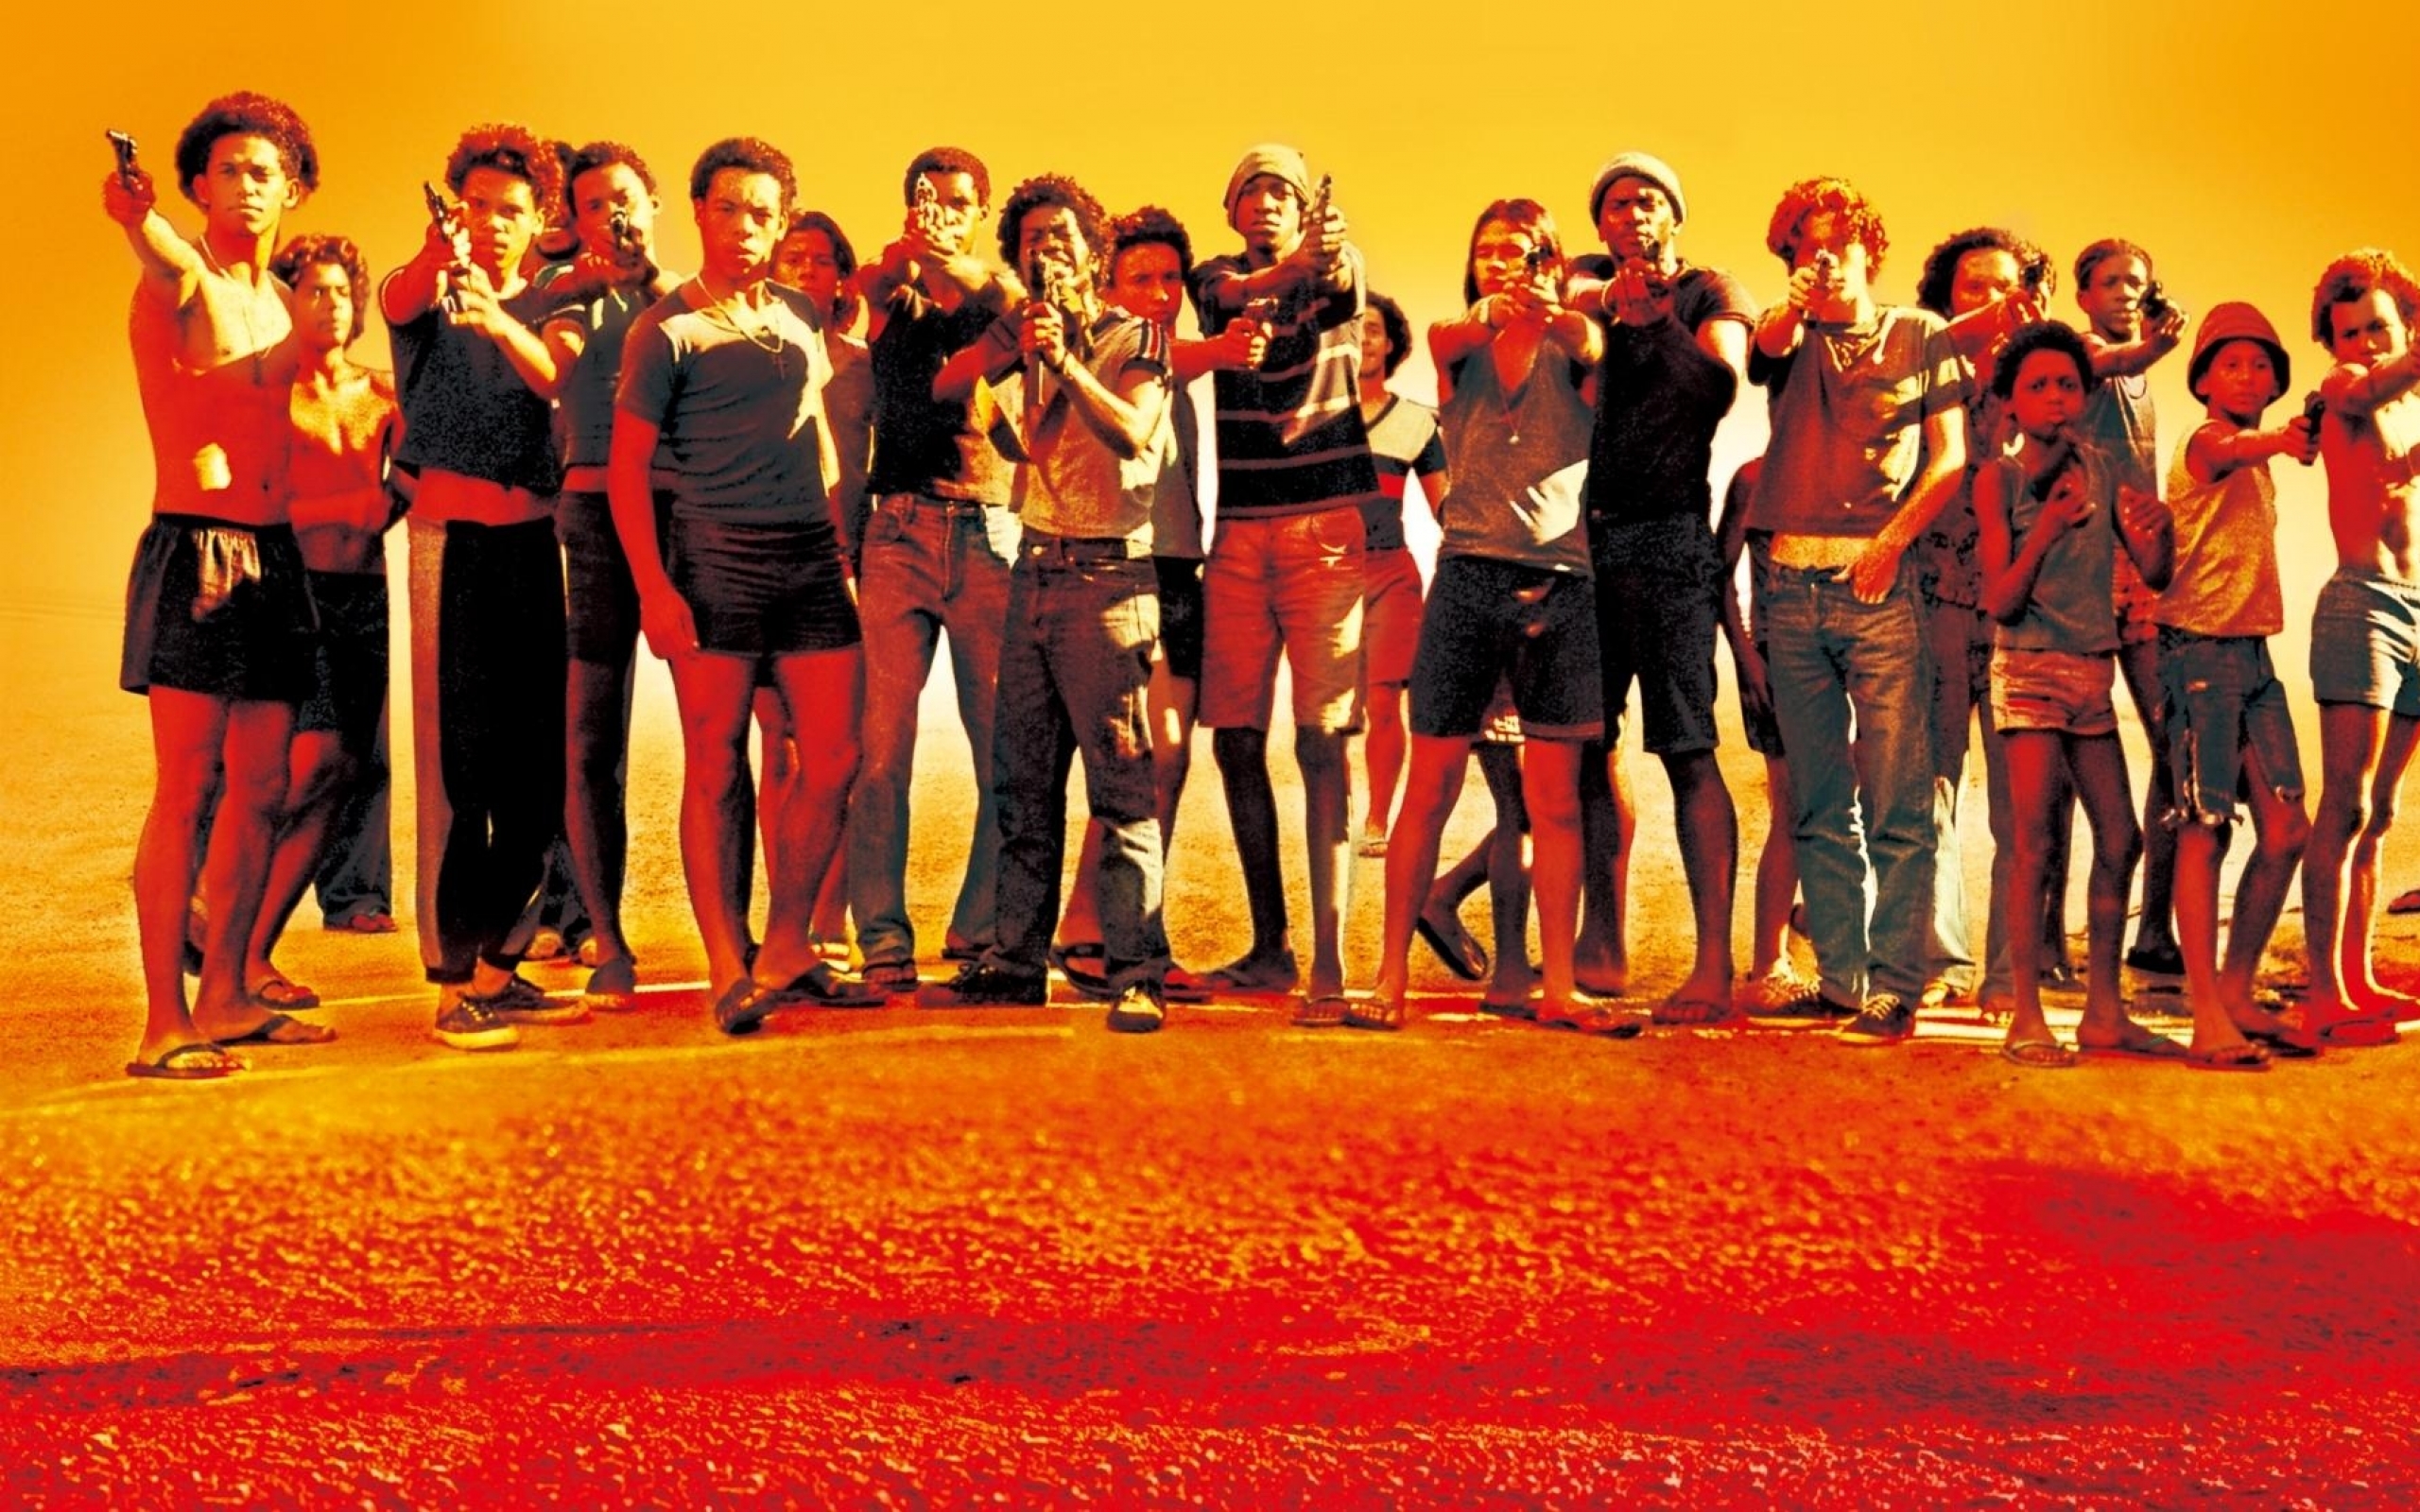 Download Wallpapers, Download 2560x1600 city of god 1980x1114 ...